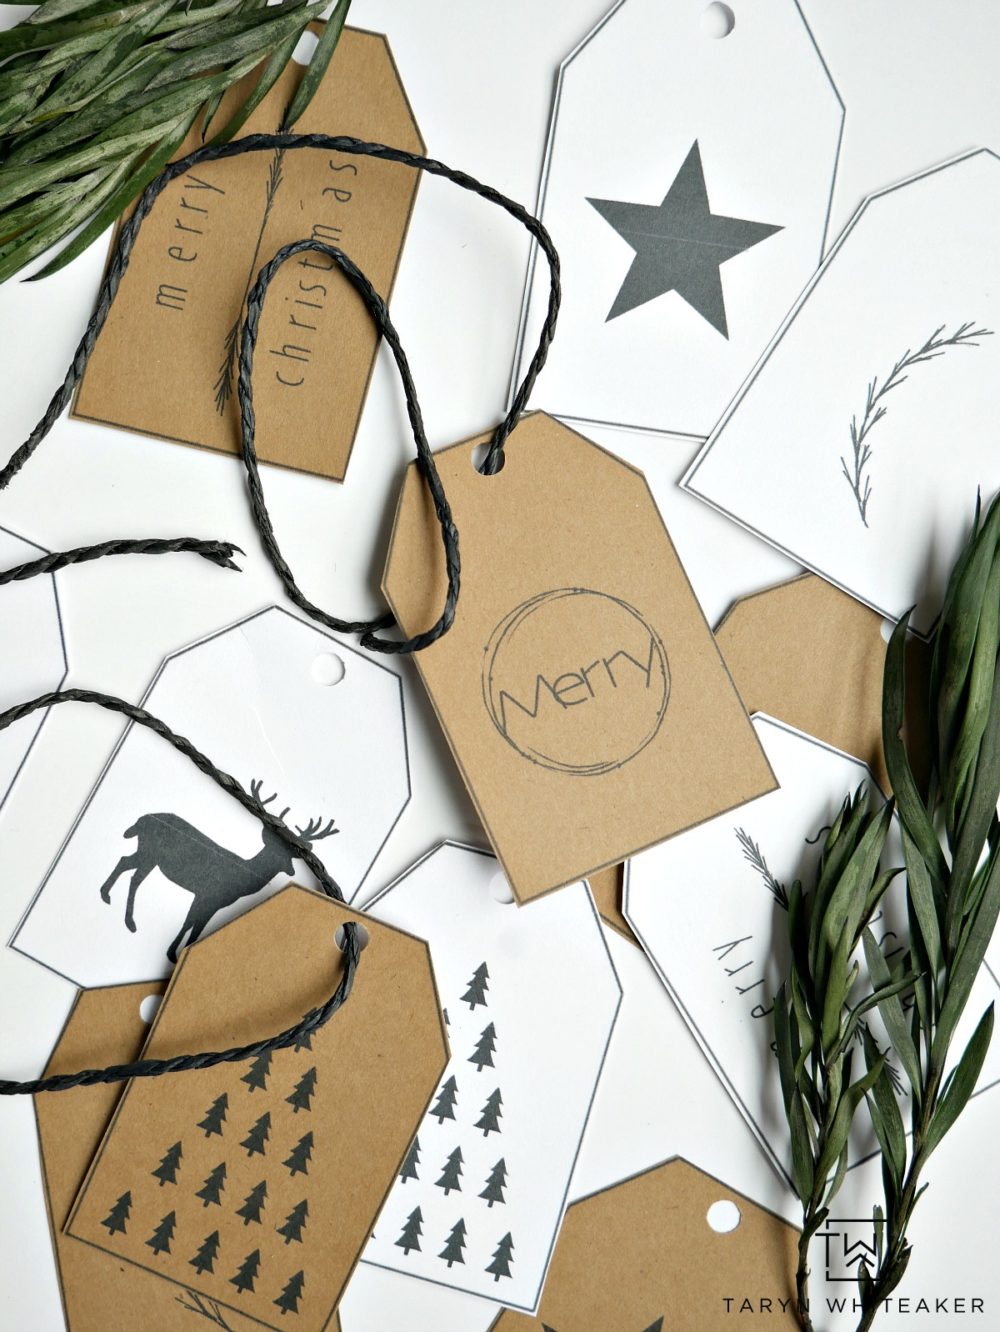 Download your own set of FREE Printable Christmas Gift Tags for this year! Simply click download and print to customize your gifts this year!